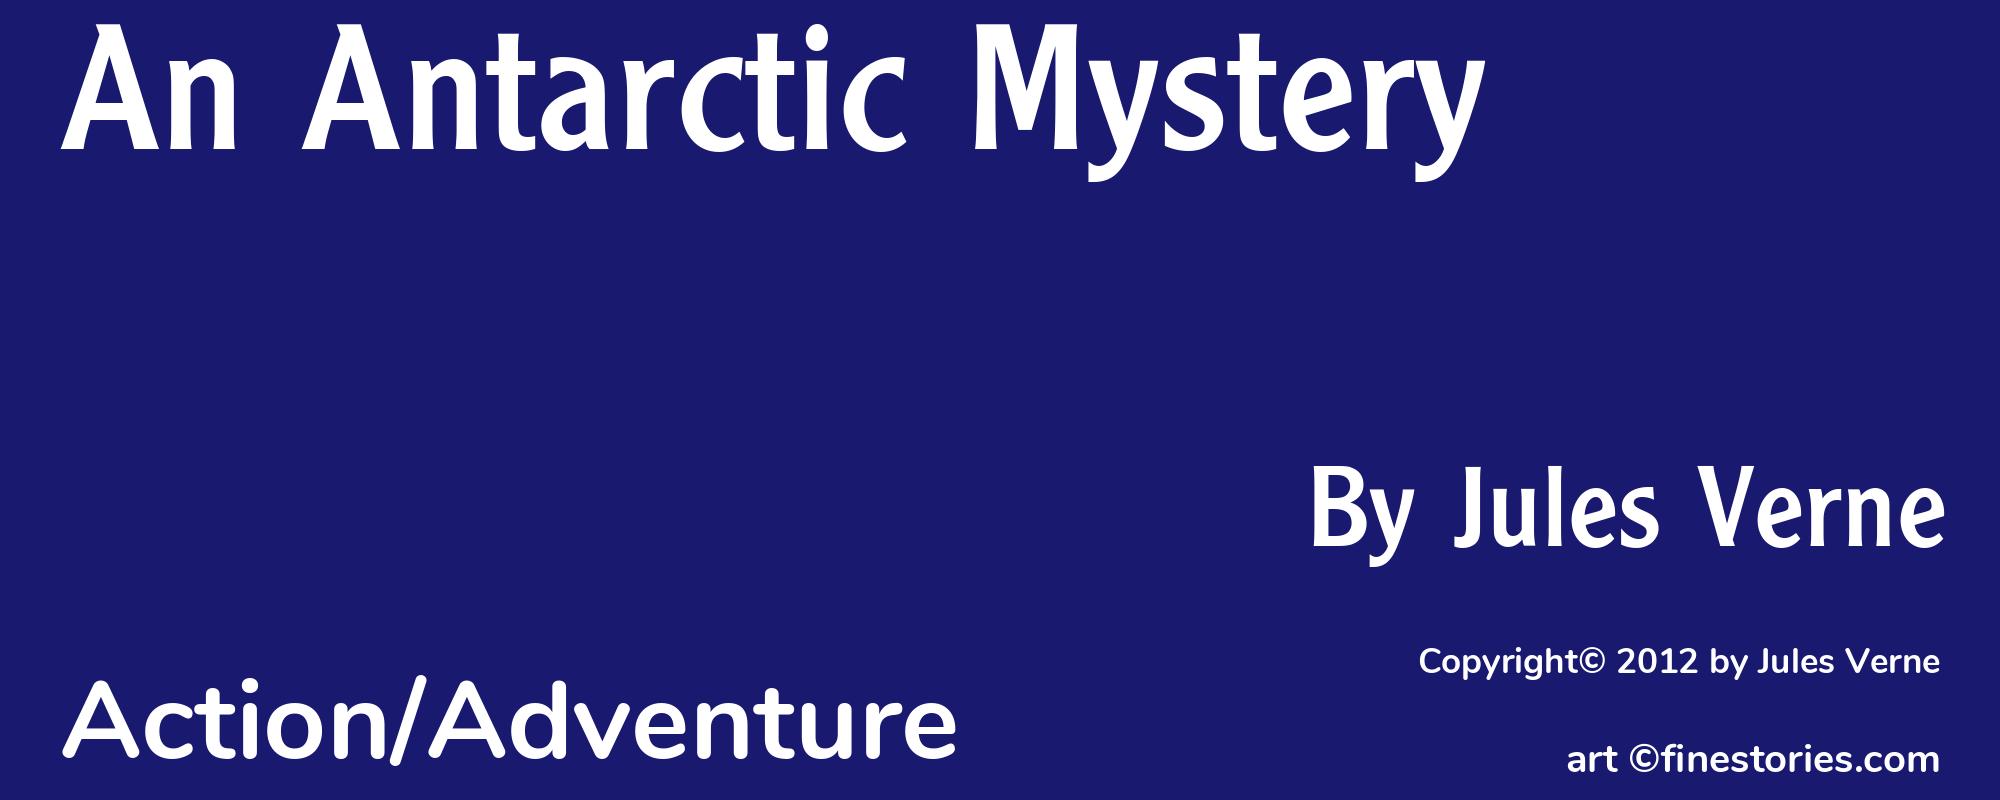 An Antarctic Mystery - Cover